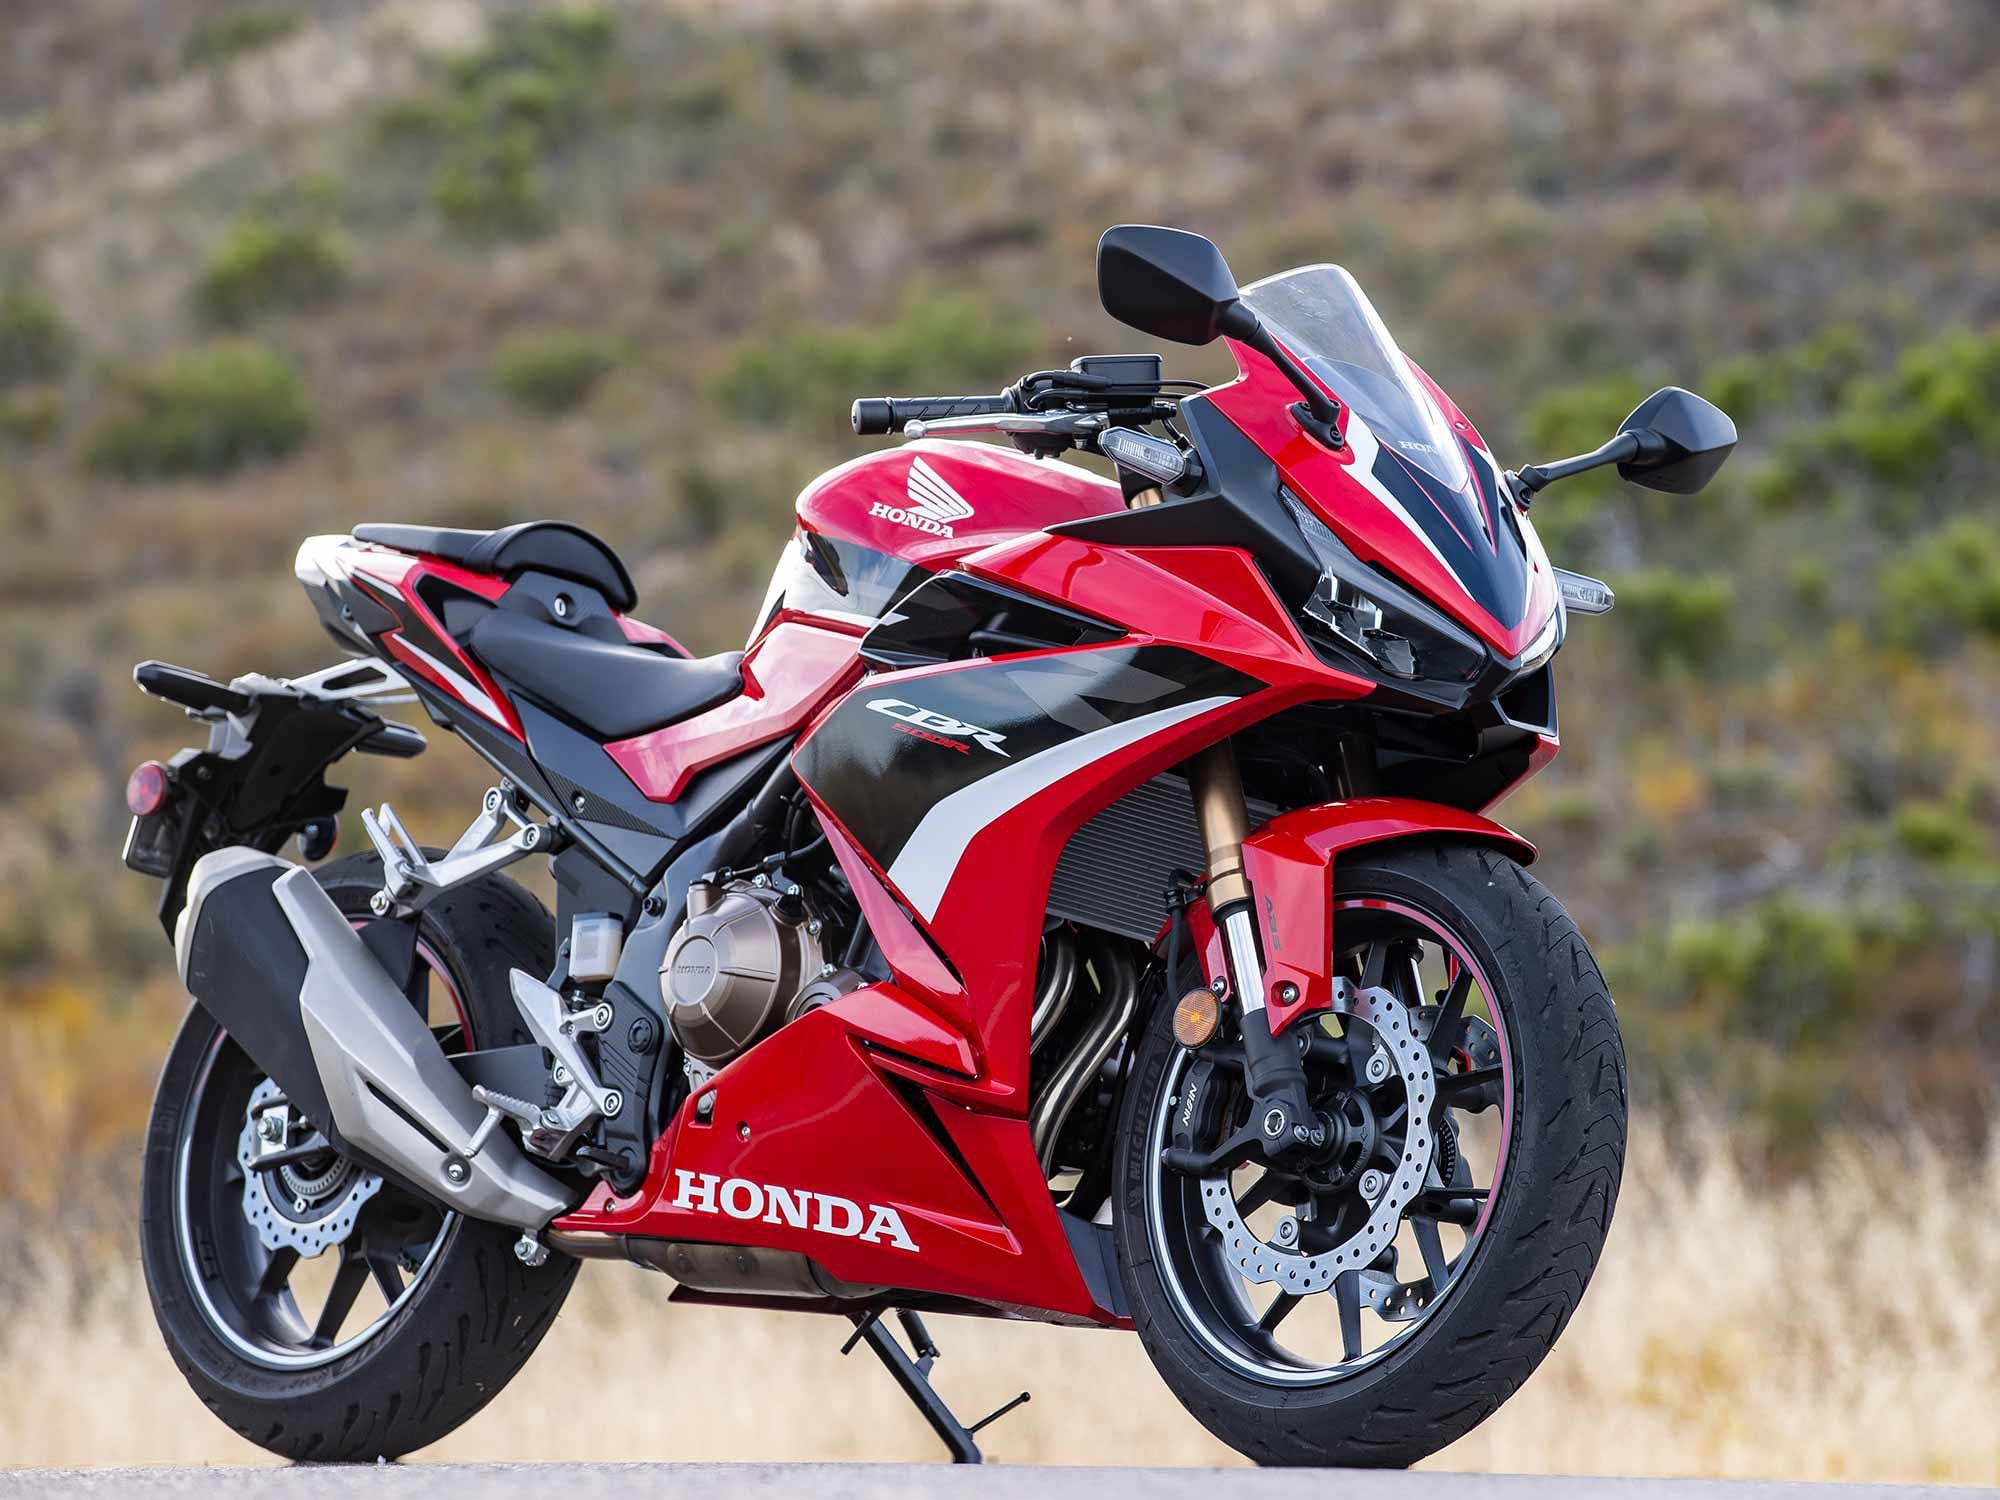 The Honda CBR500R is one of three entry-level models from Big Red to share the same basic platform, including the CB500F and adventure-inspired CB500X.